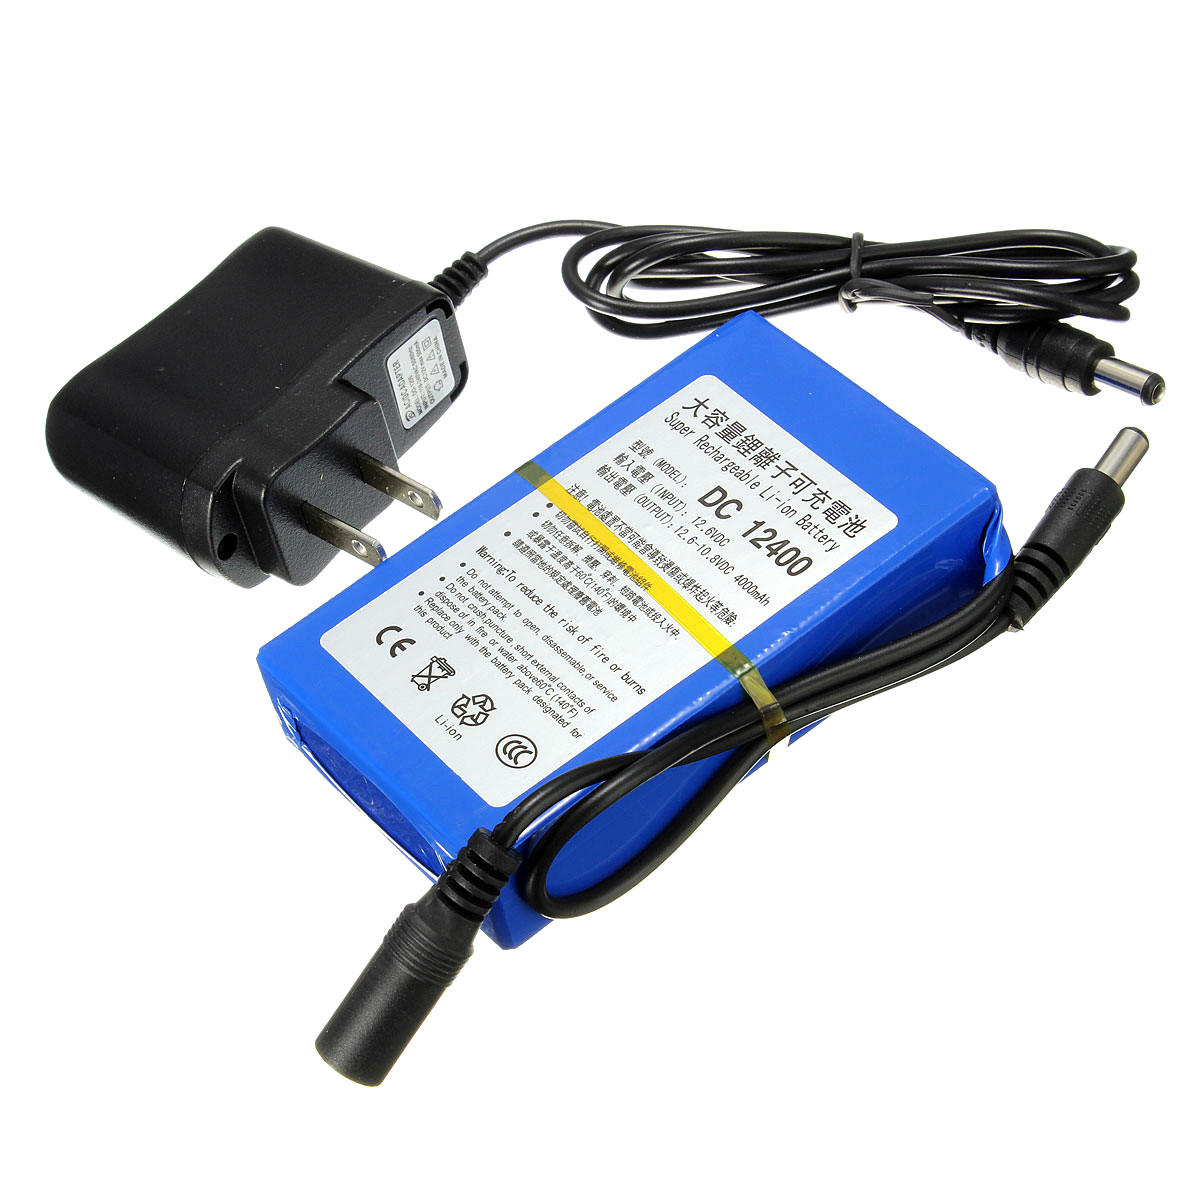 

11.1V 4000mAh Rechargeable Portable Lithium-ion Battery Pack with AC/DC Charger